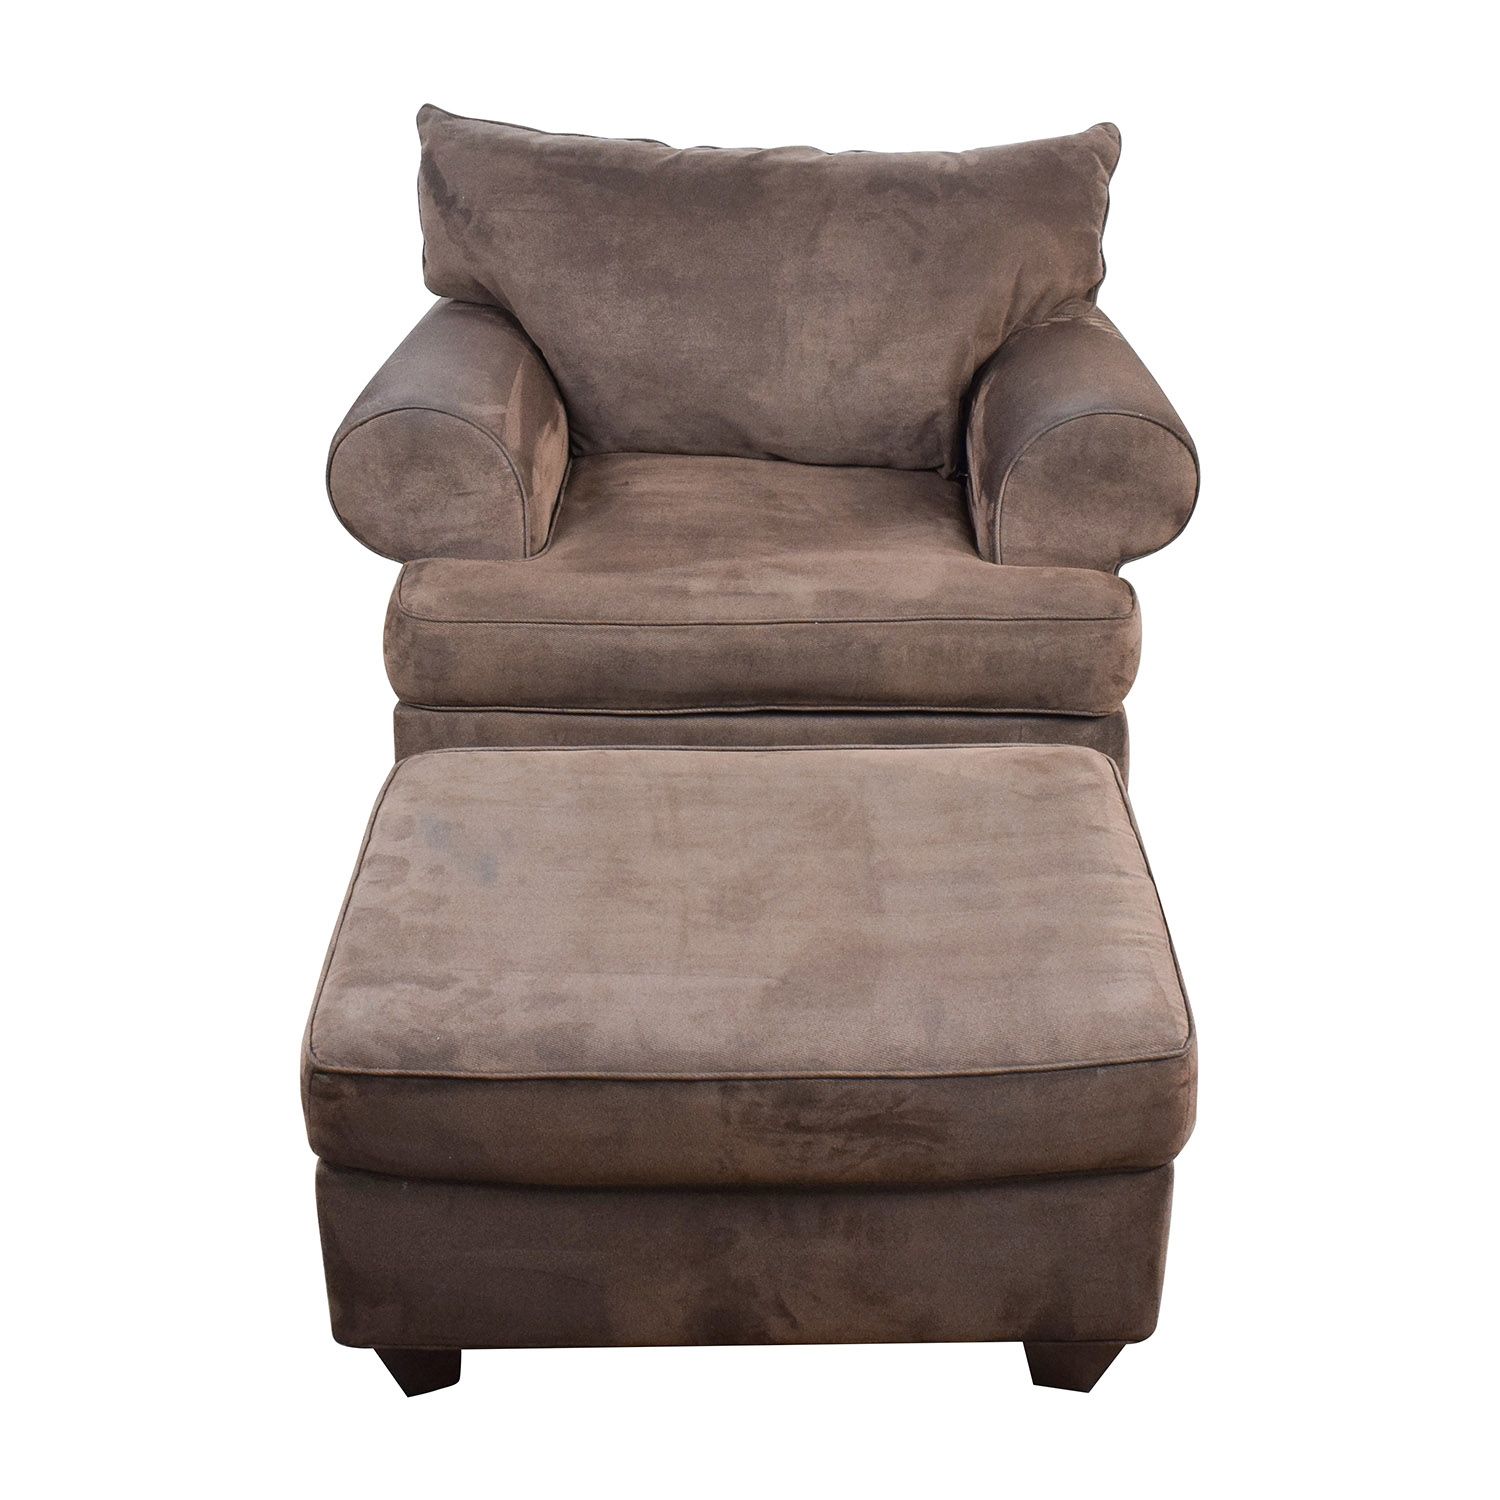 67 Off Dark Brown Sofa Chair With Ottoman Chairs With Regard To Sofa Chair With Ottoman (View 6 of 15)